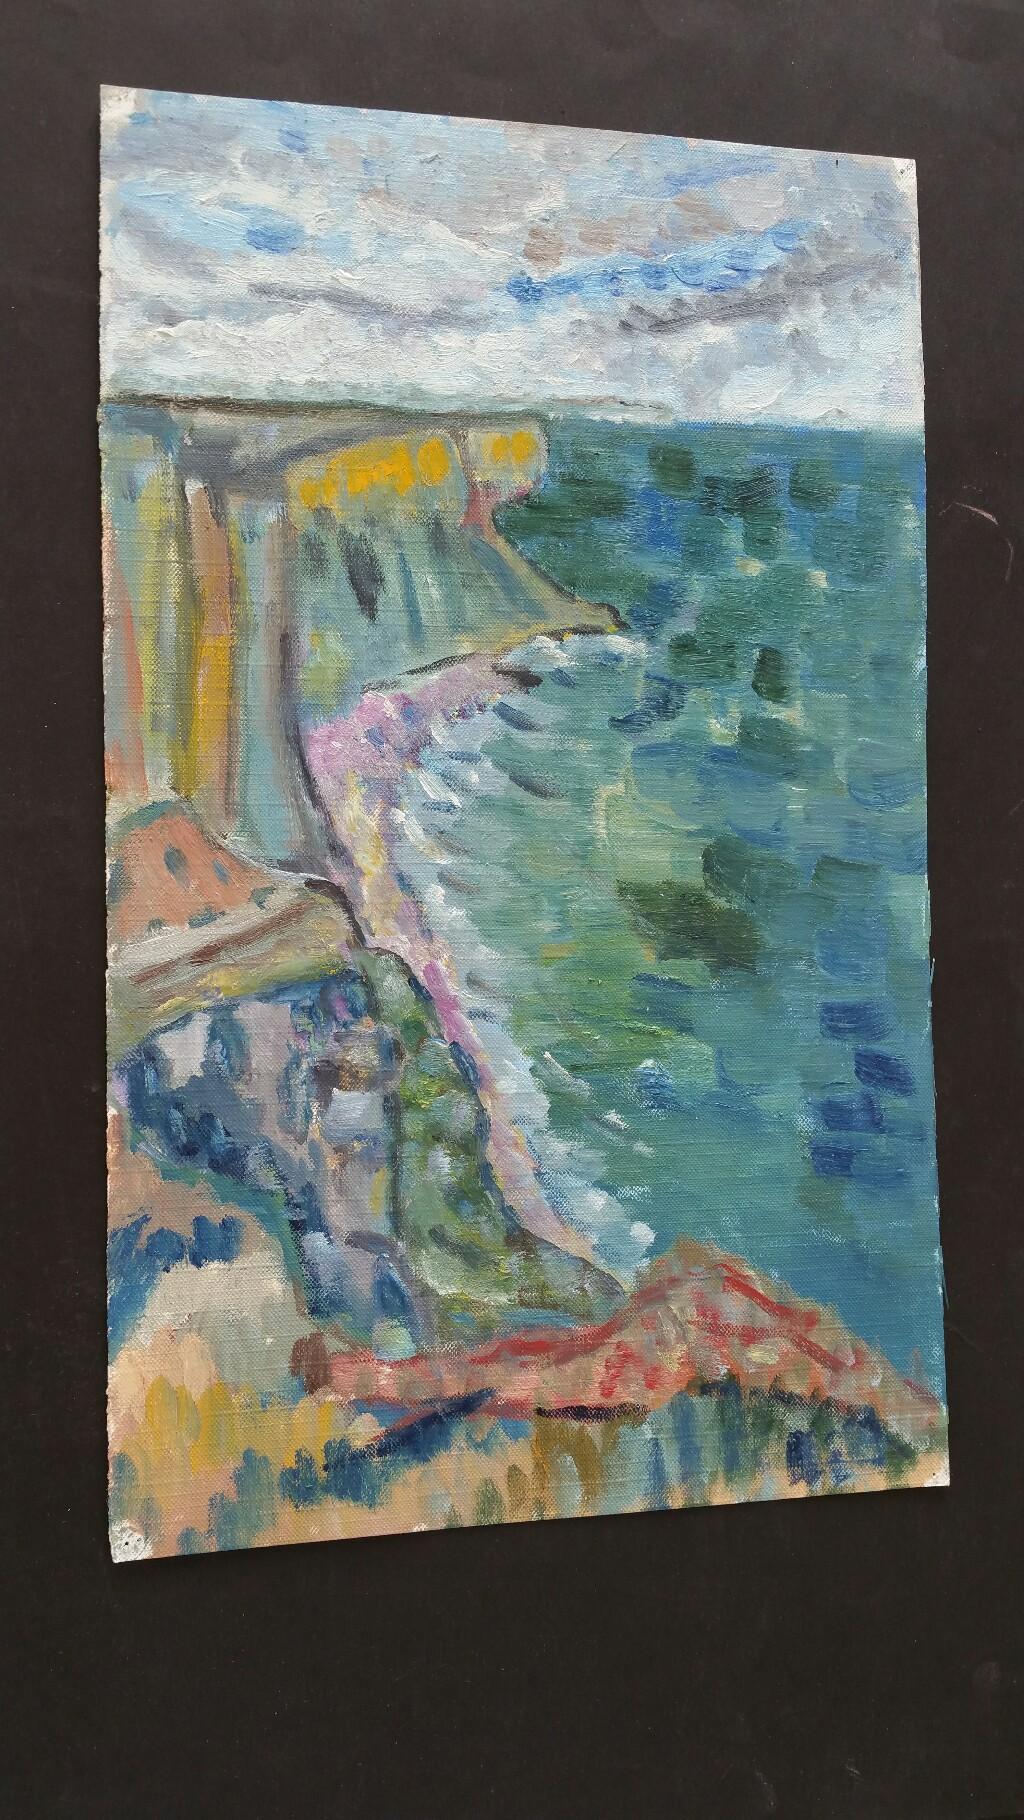 A Summer French Coastline
French School, mid-late 20th century
unsigned
oil painting on canvas textured paper (reverse side is smooth, the painted side looks and feels as canvas), unframed
overall 15 x 9 inches

Vibrant oil painting depicting a